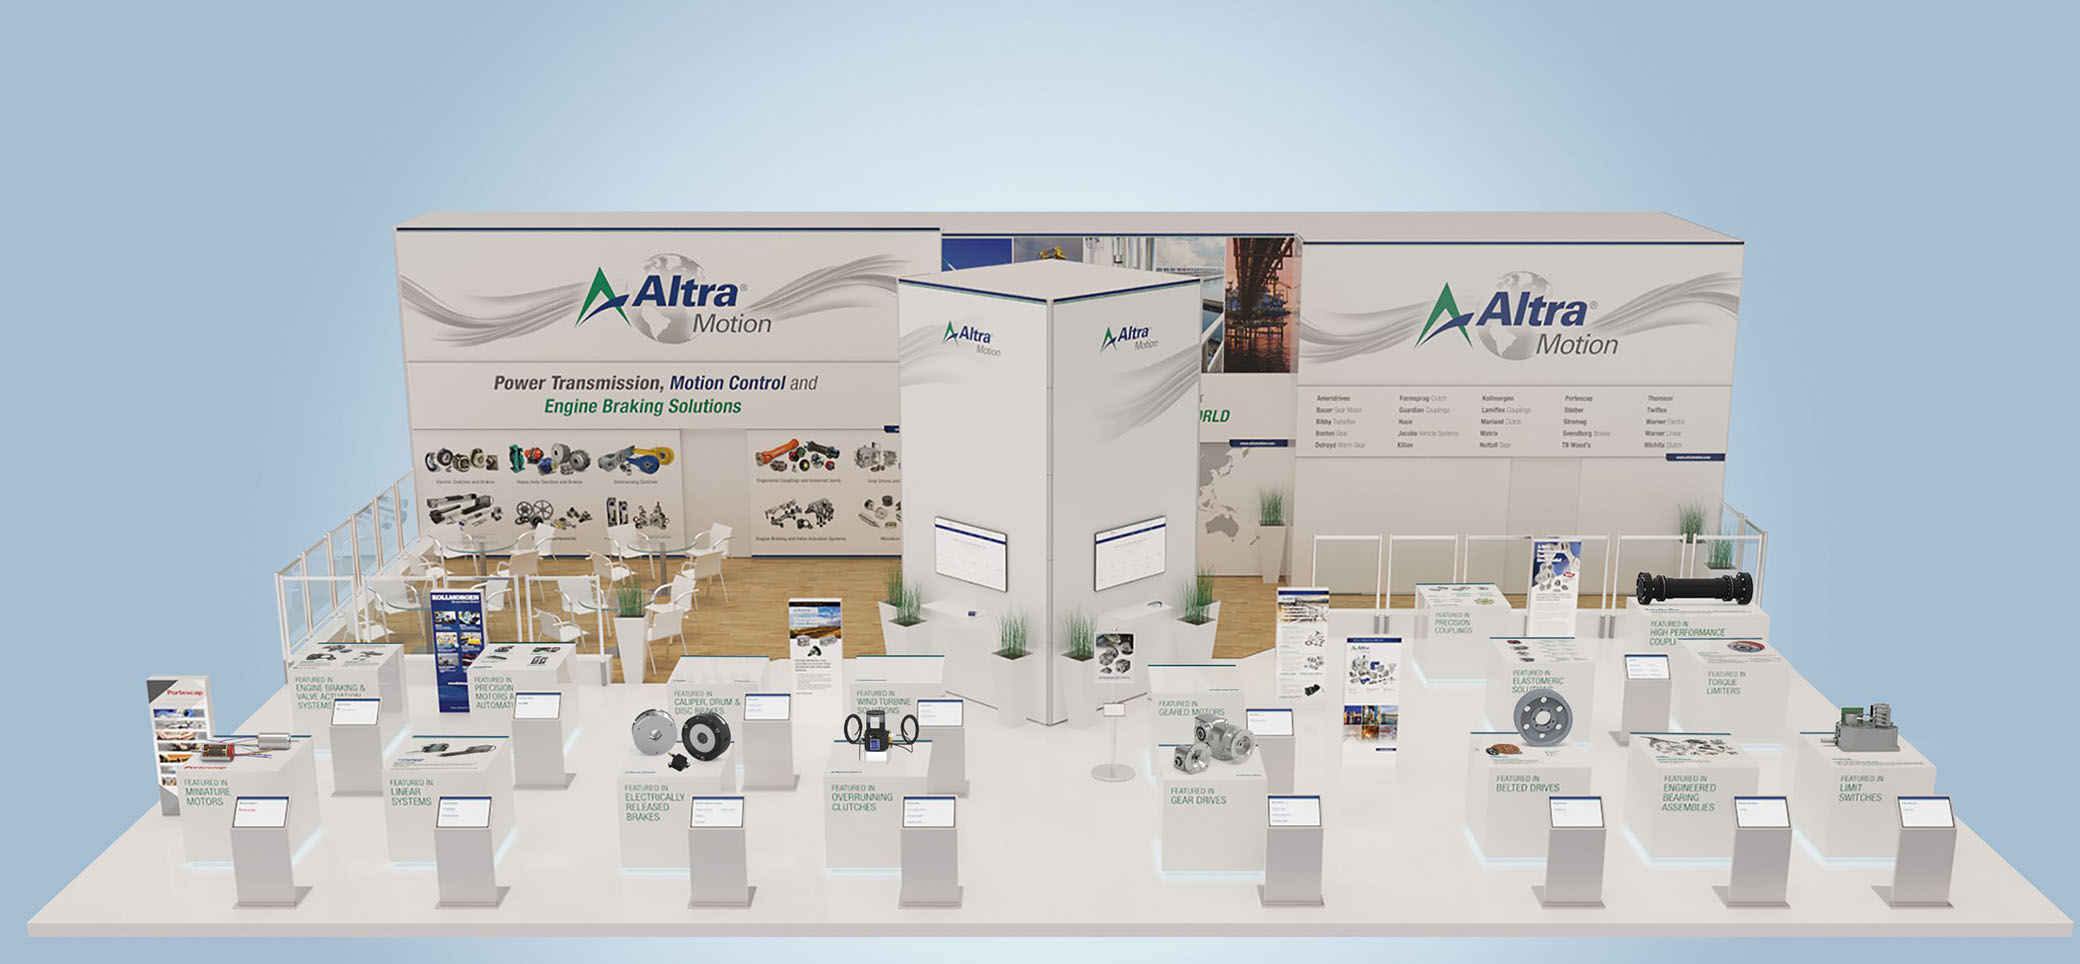 Altra Industrial Motion Corp. has launched its new virtual exhibition stand gathering leading brands and high-quality solutions in an interactive browser experience